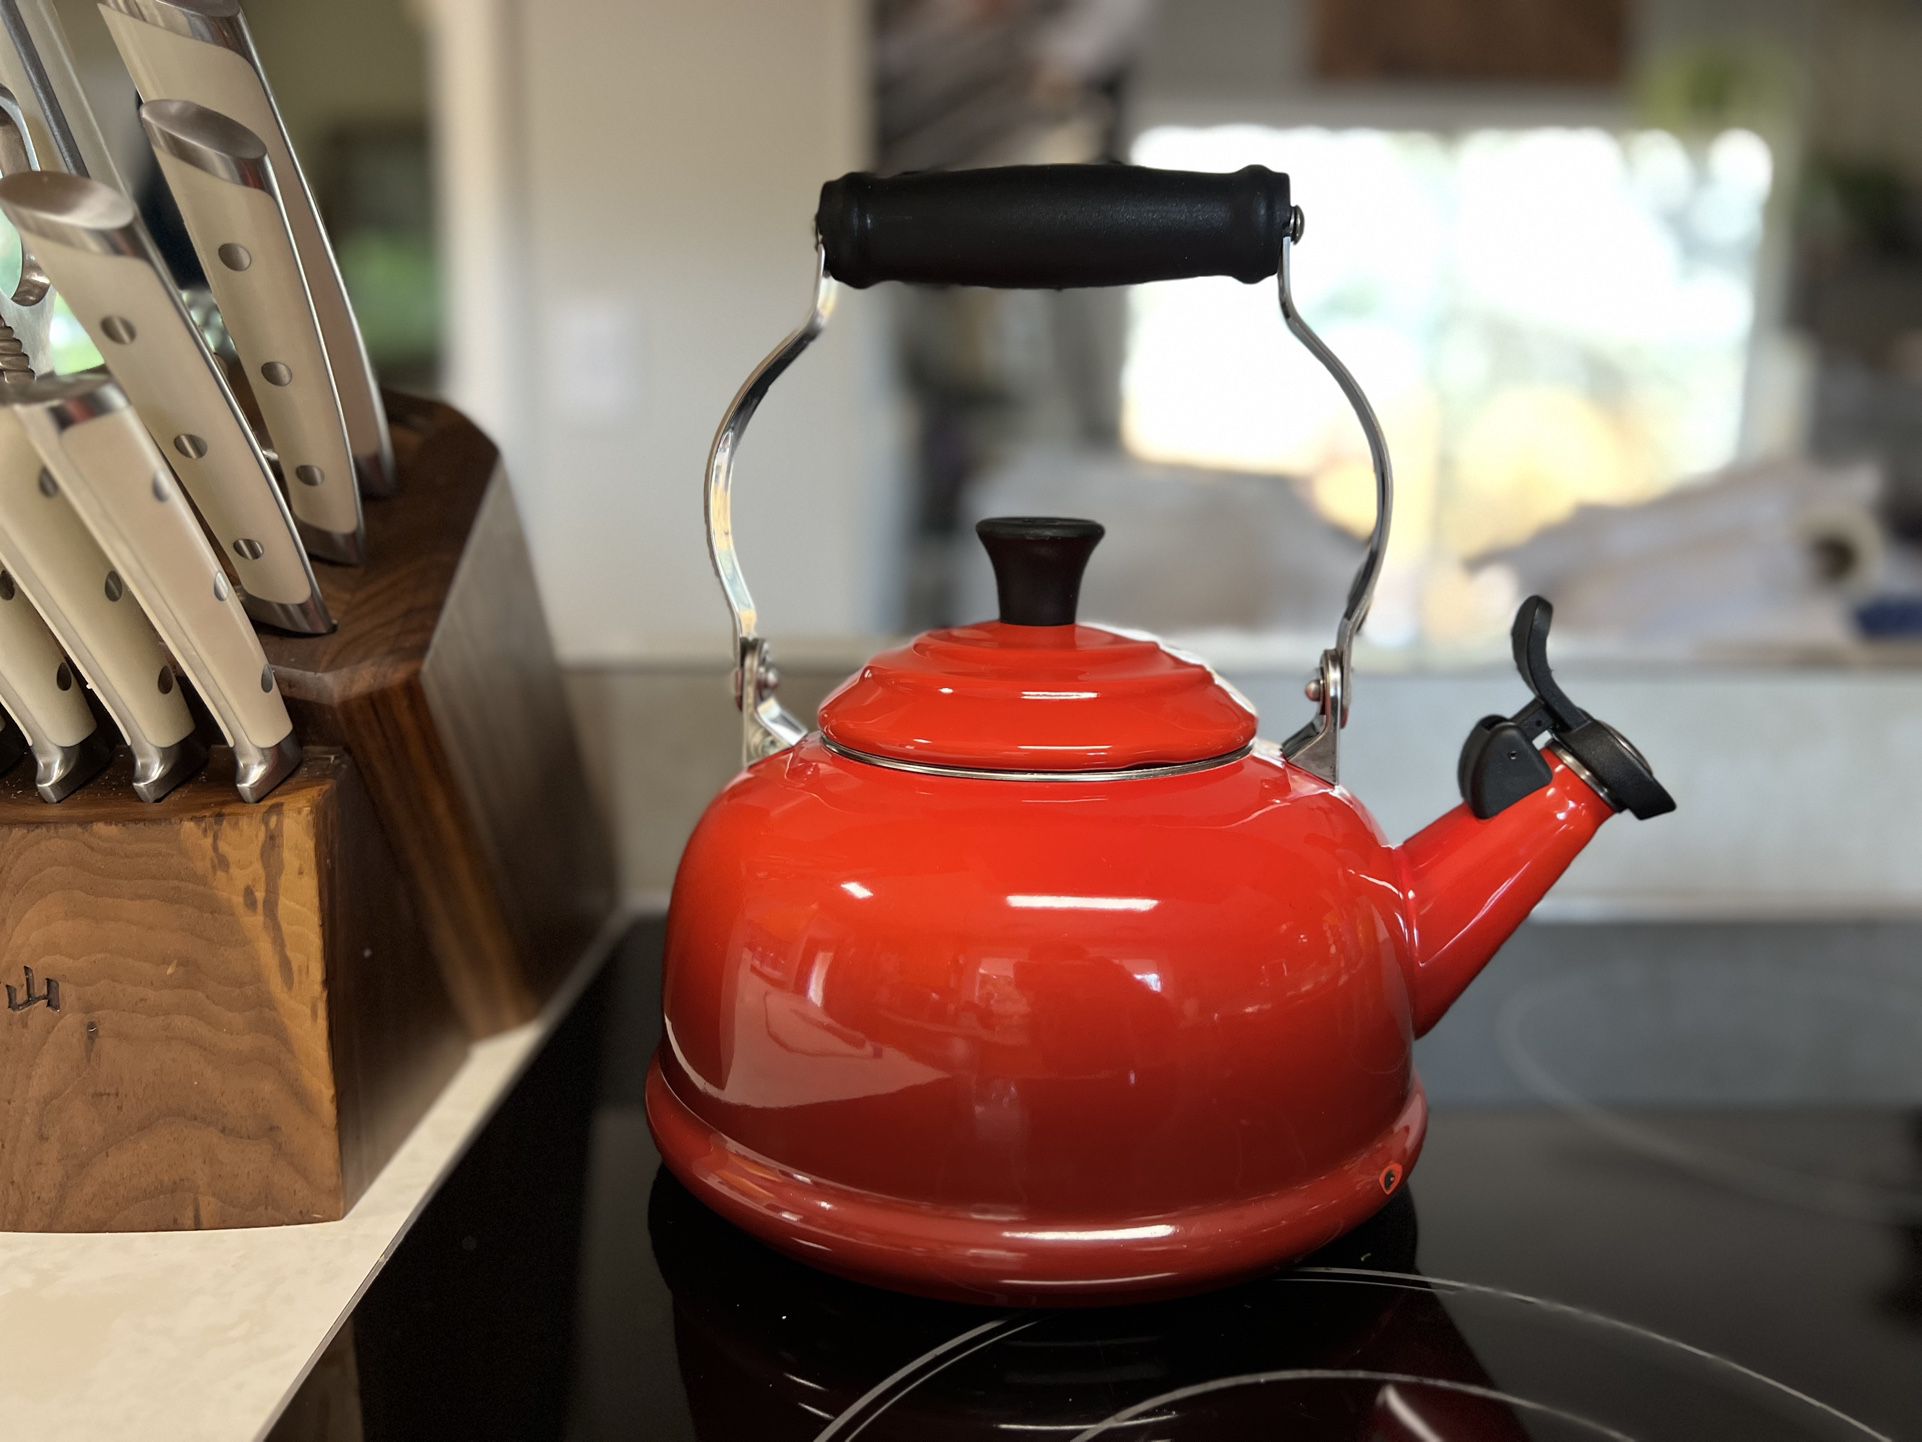 Le Creuset Classic Whistling Kettle, Cerise (Red) for Sale in Everett, WA -  OfferUp